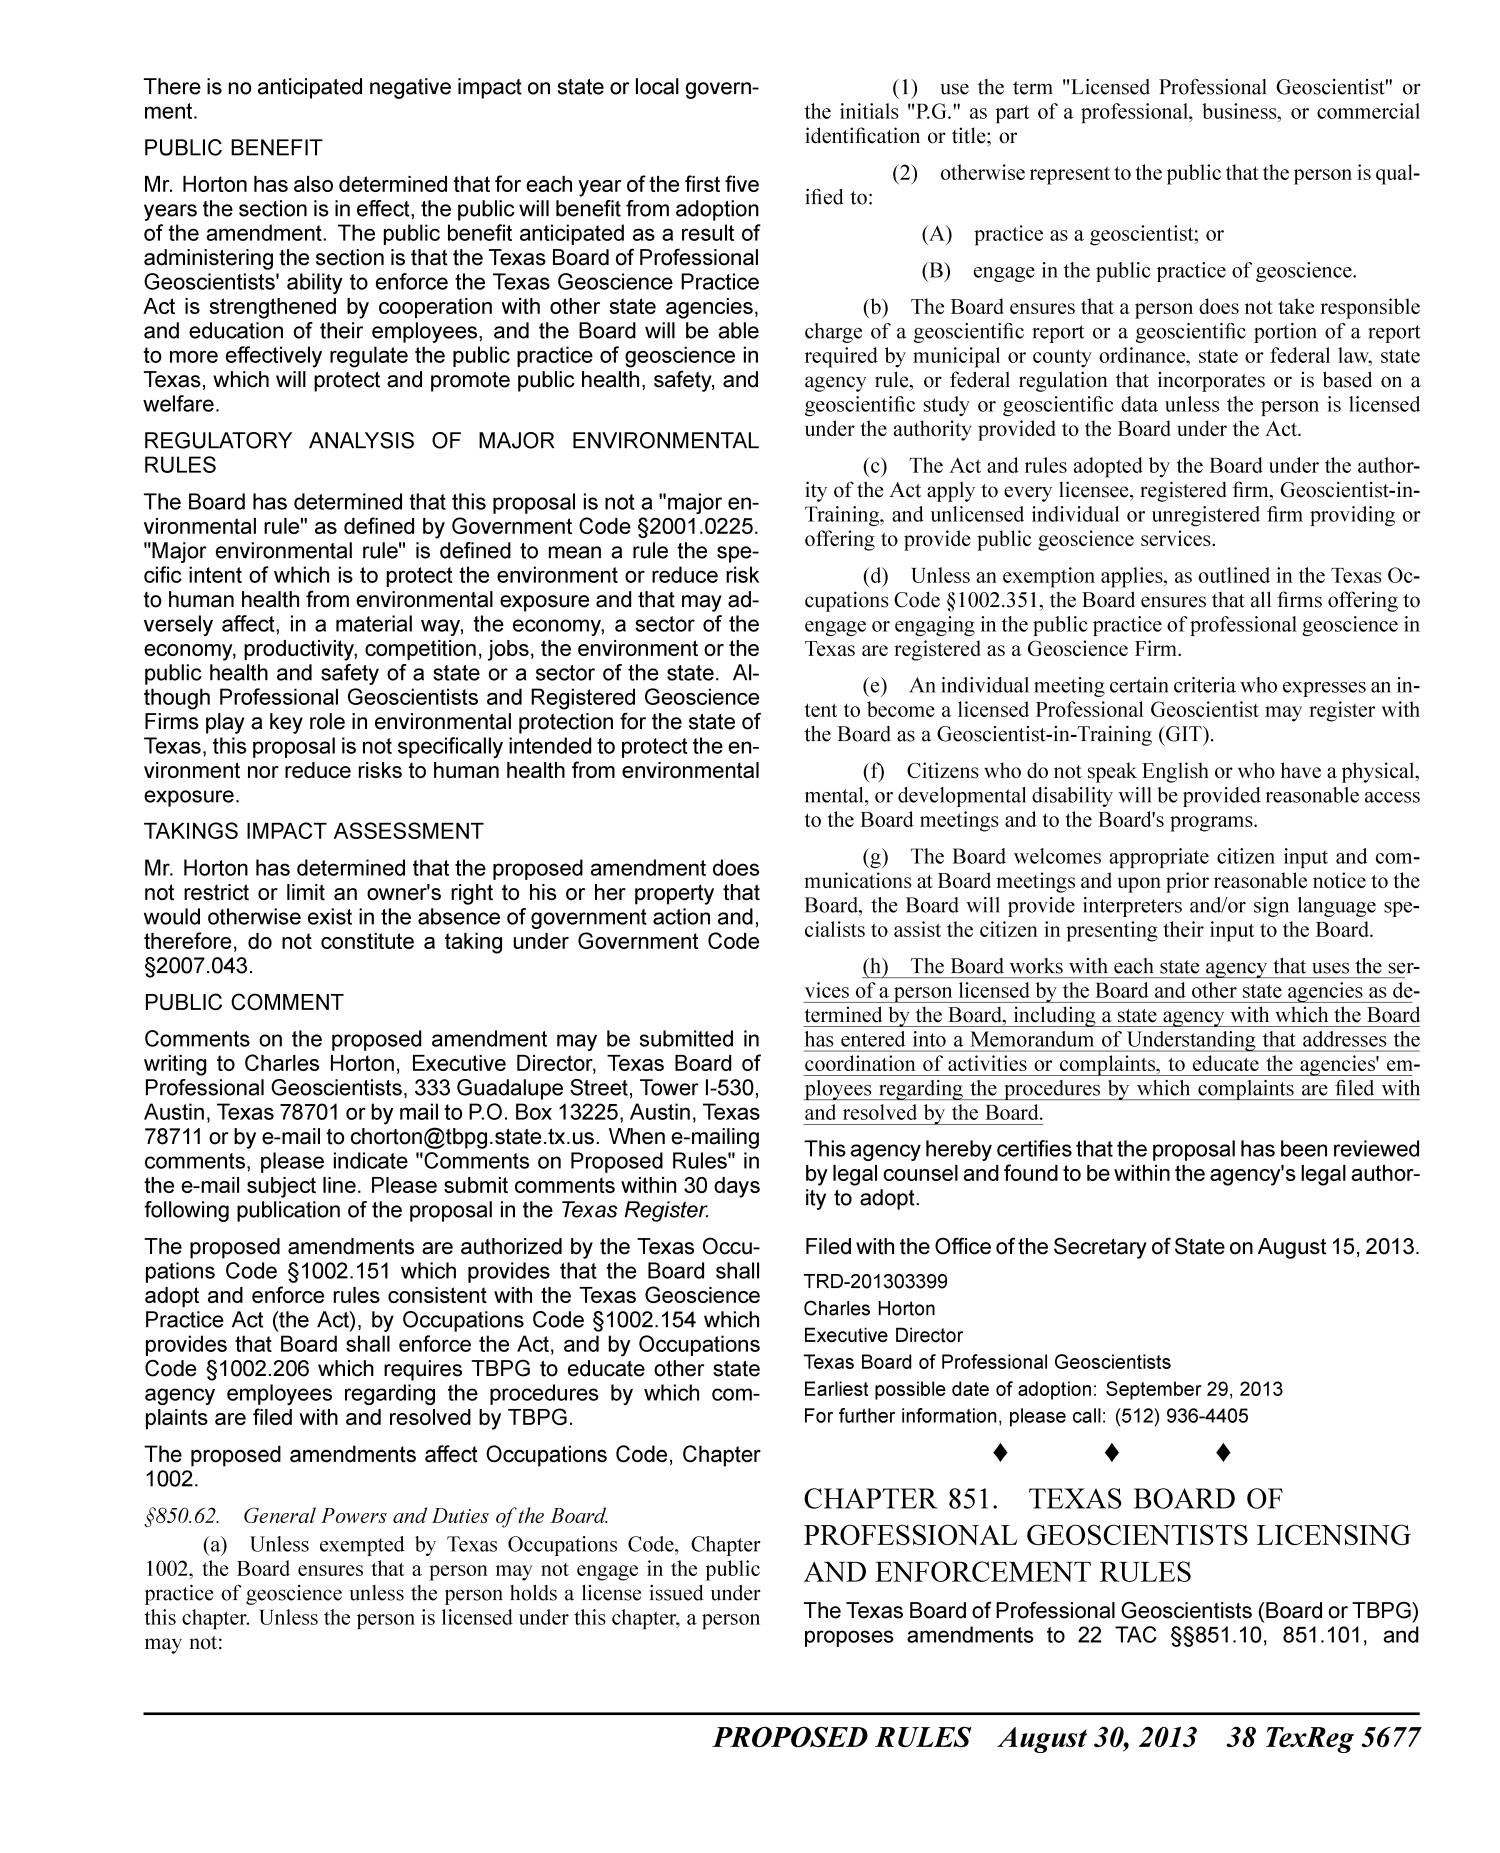 Texas Register, Volume 38, Number 35, Pages 5587-5800, August 30, 2013
                                                
                                                    5677
                                                